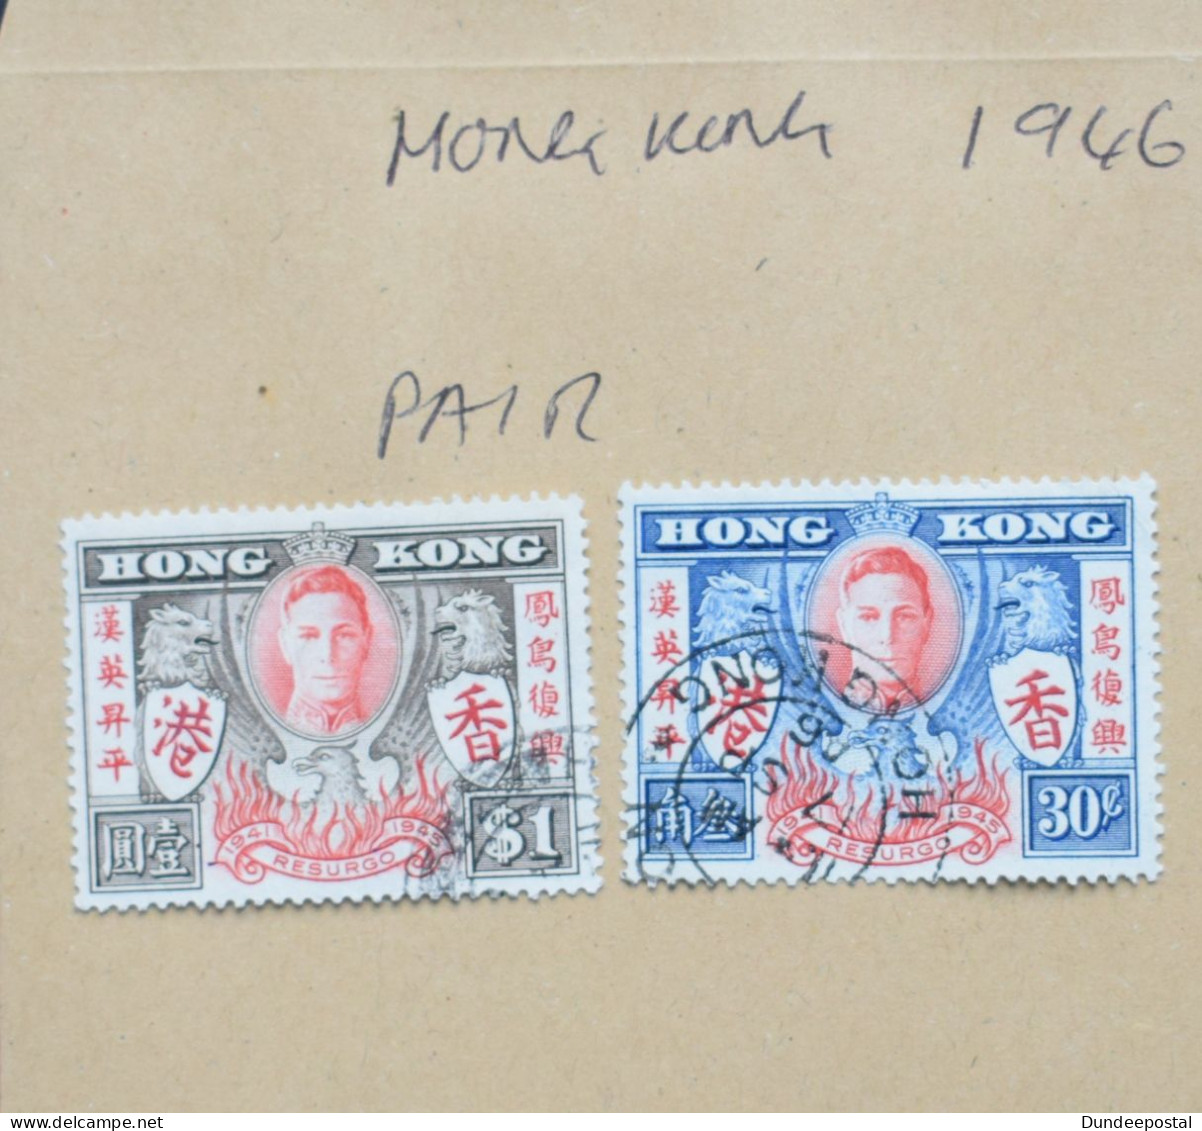 HONG KONG STAMPS Set 1946  ~~L@@K~~ - Used Stamps